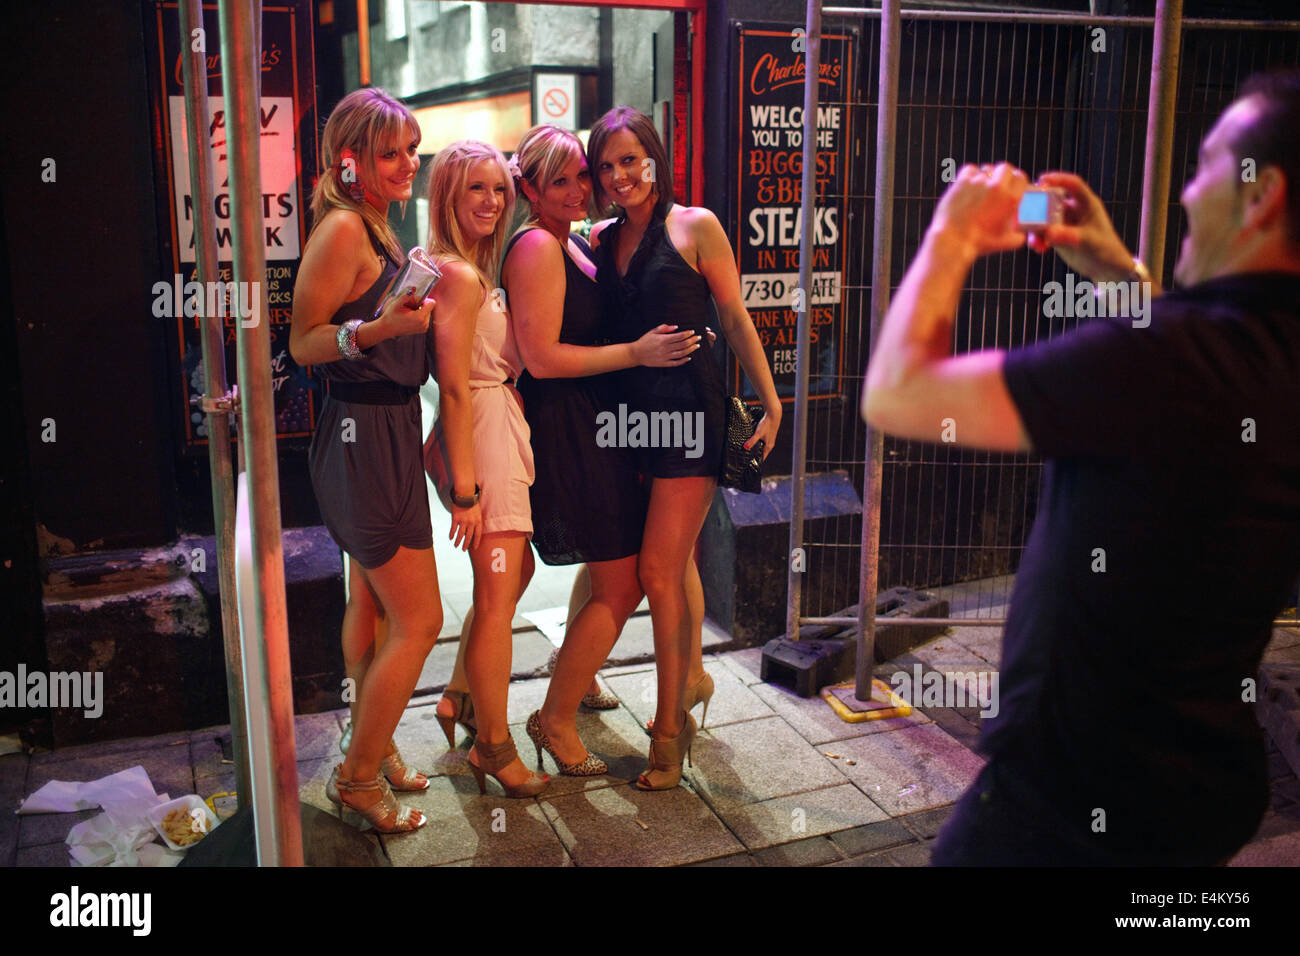 A group of young women posing to a photo on a weekend night in Cardiff, Wales, UK Stock Photo